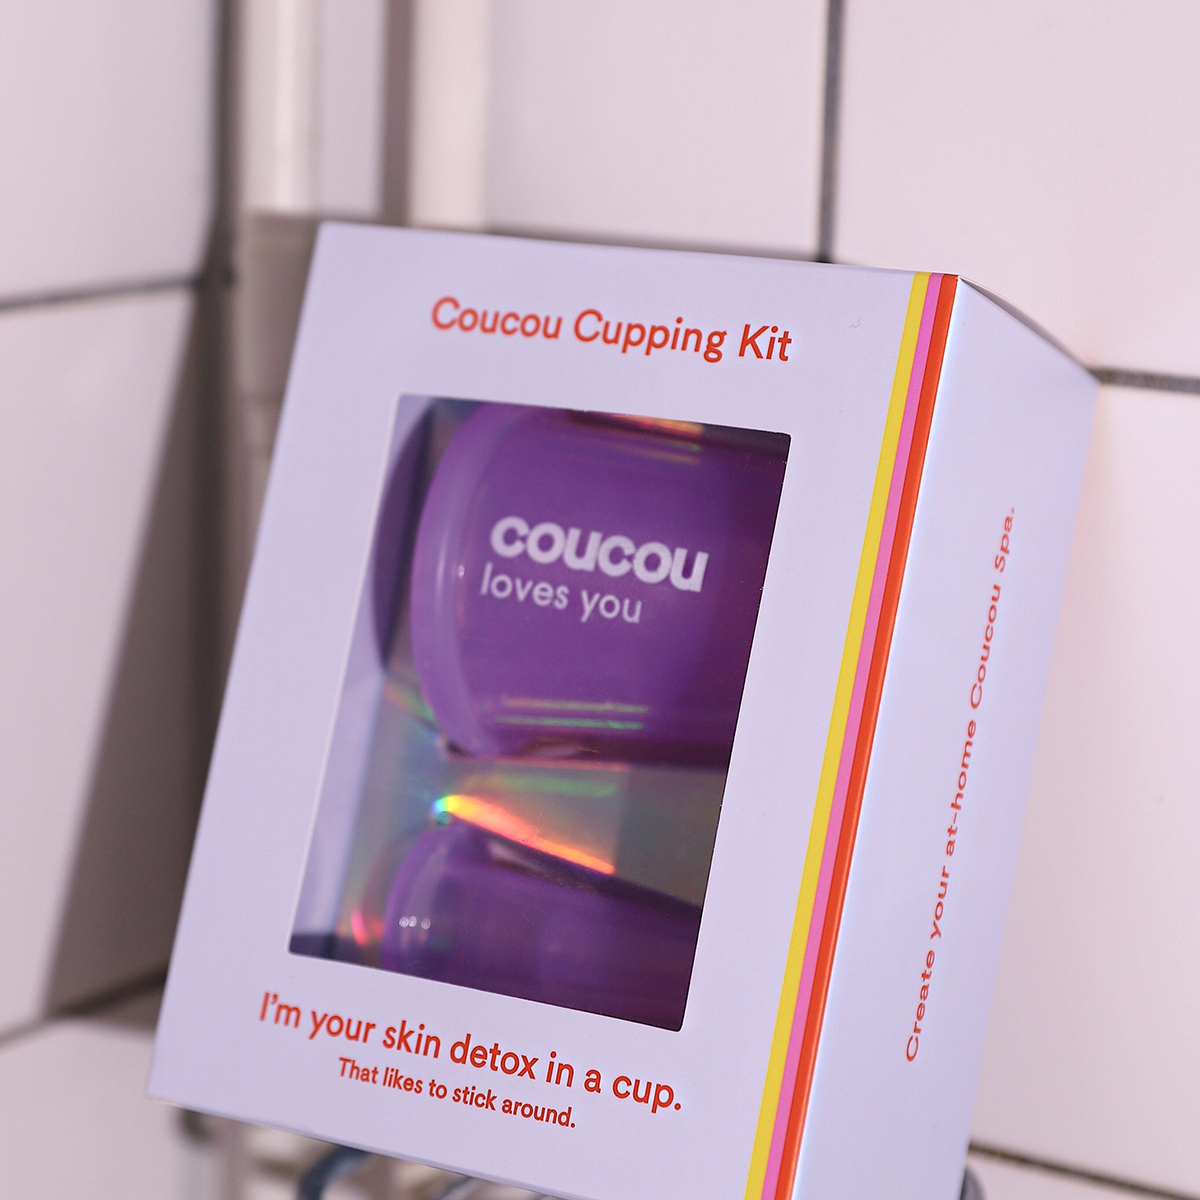 The Coucou Club - Coucou Cupping Kit